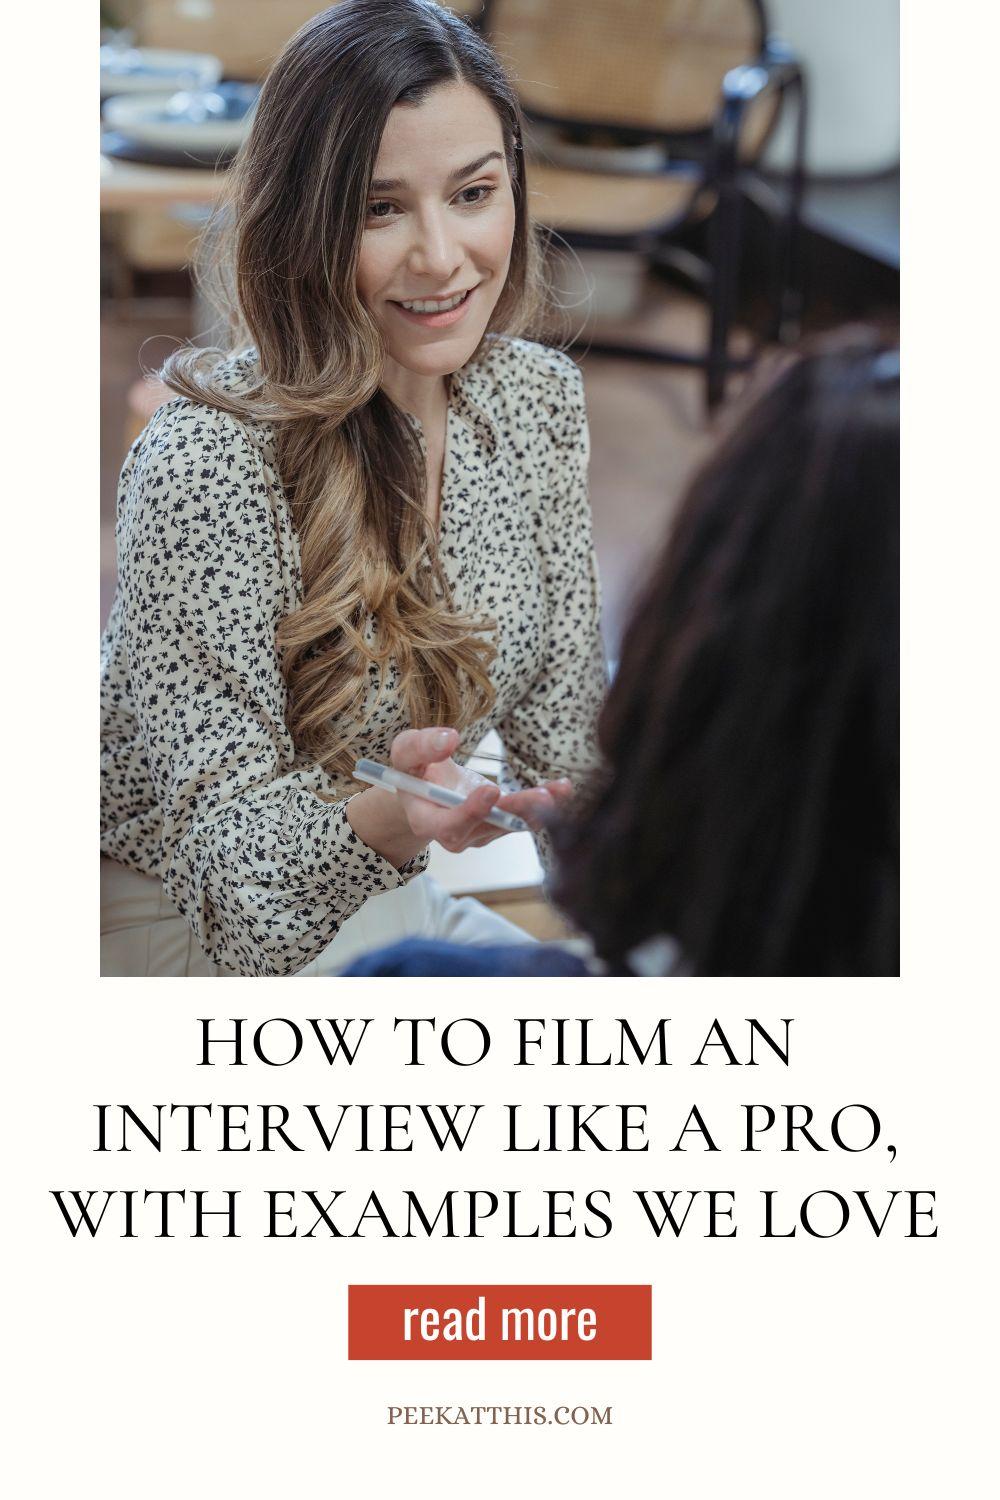 How To Film An Interview Like A Pro For Content Creation - Including ...